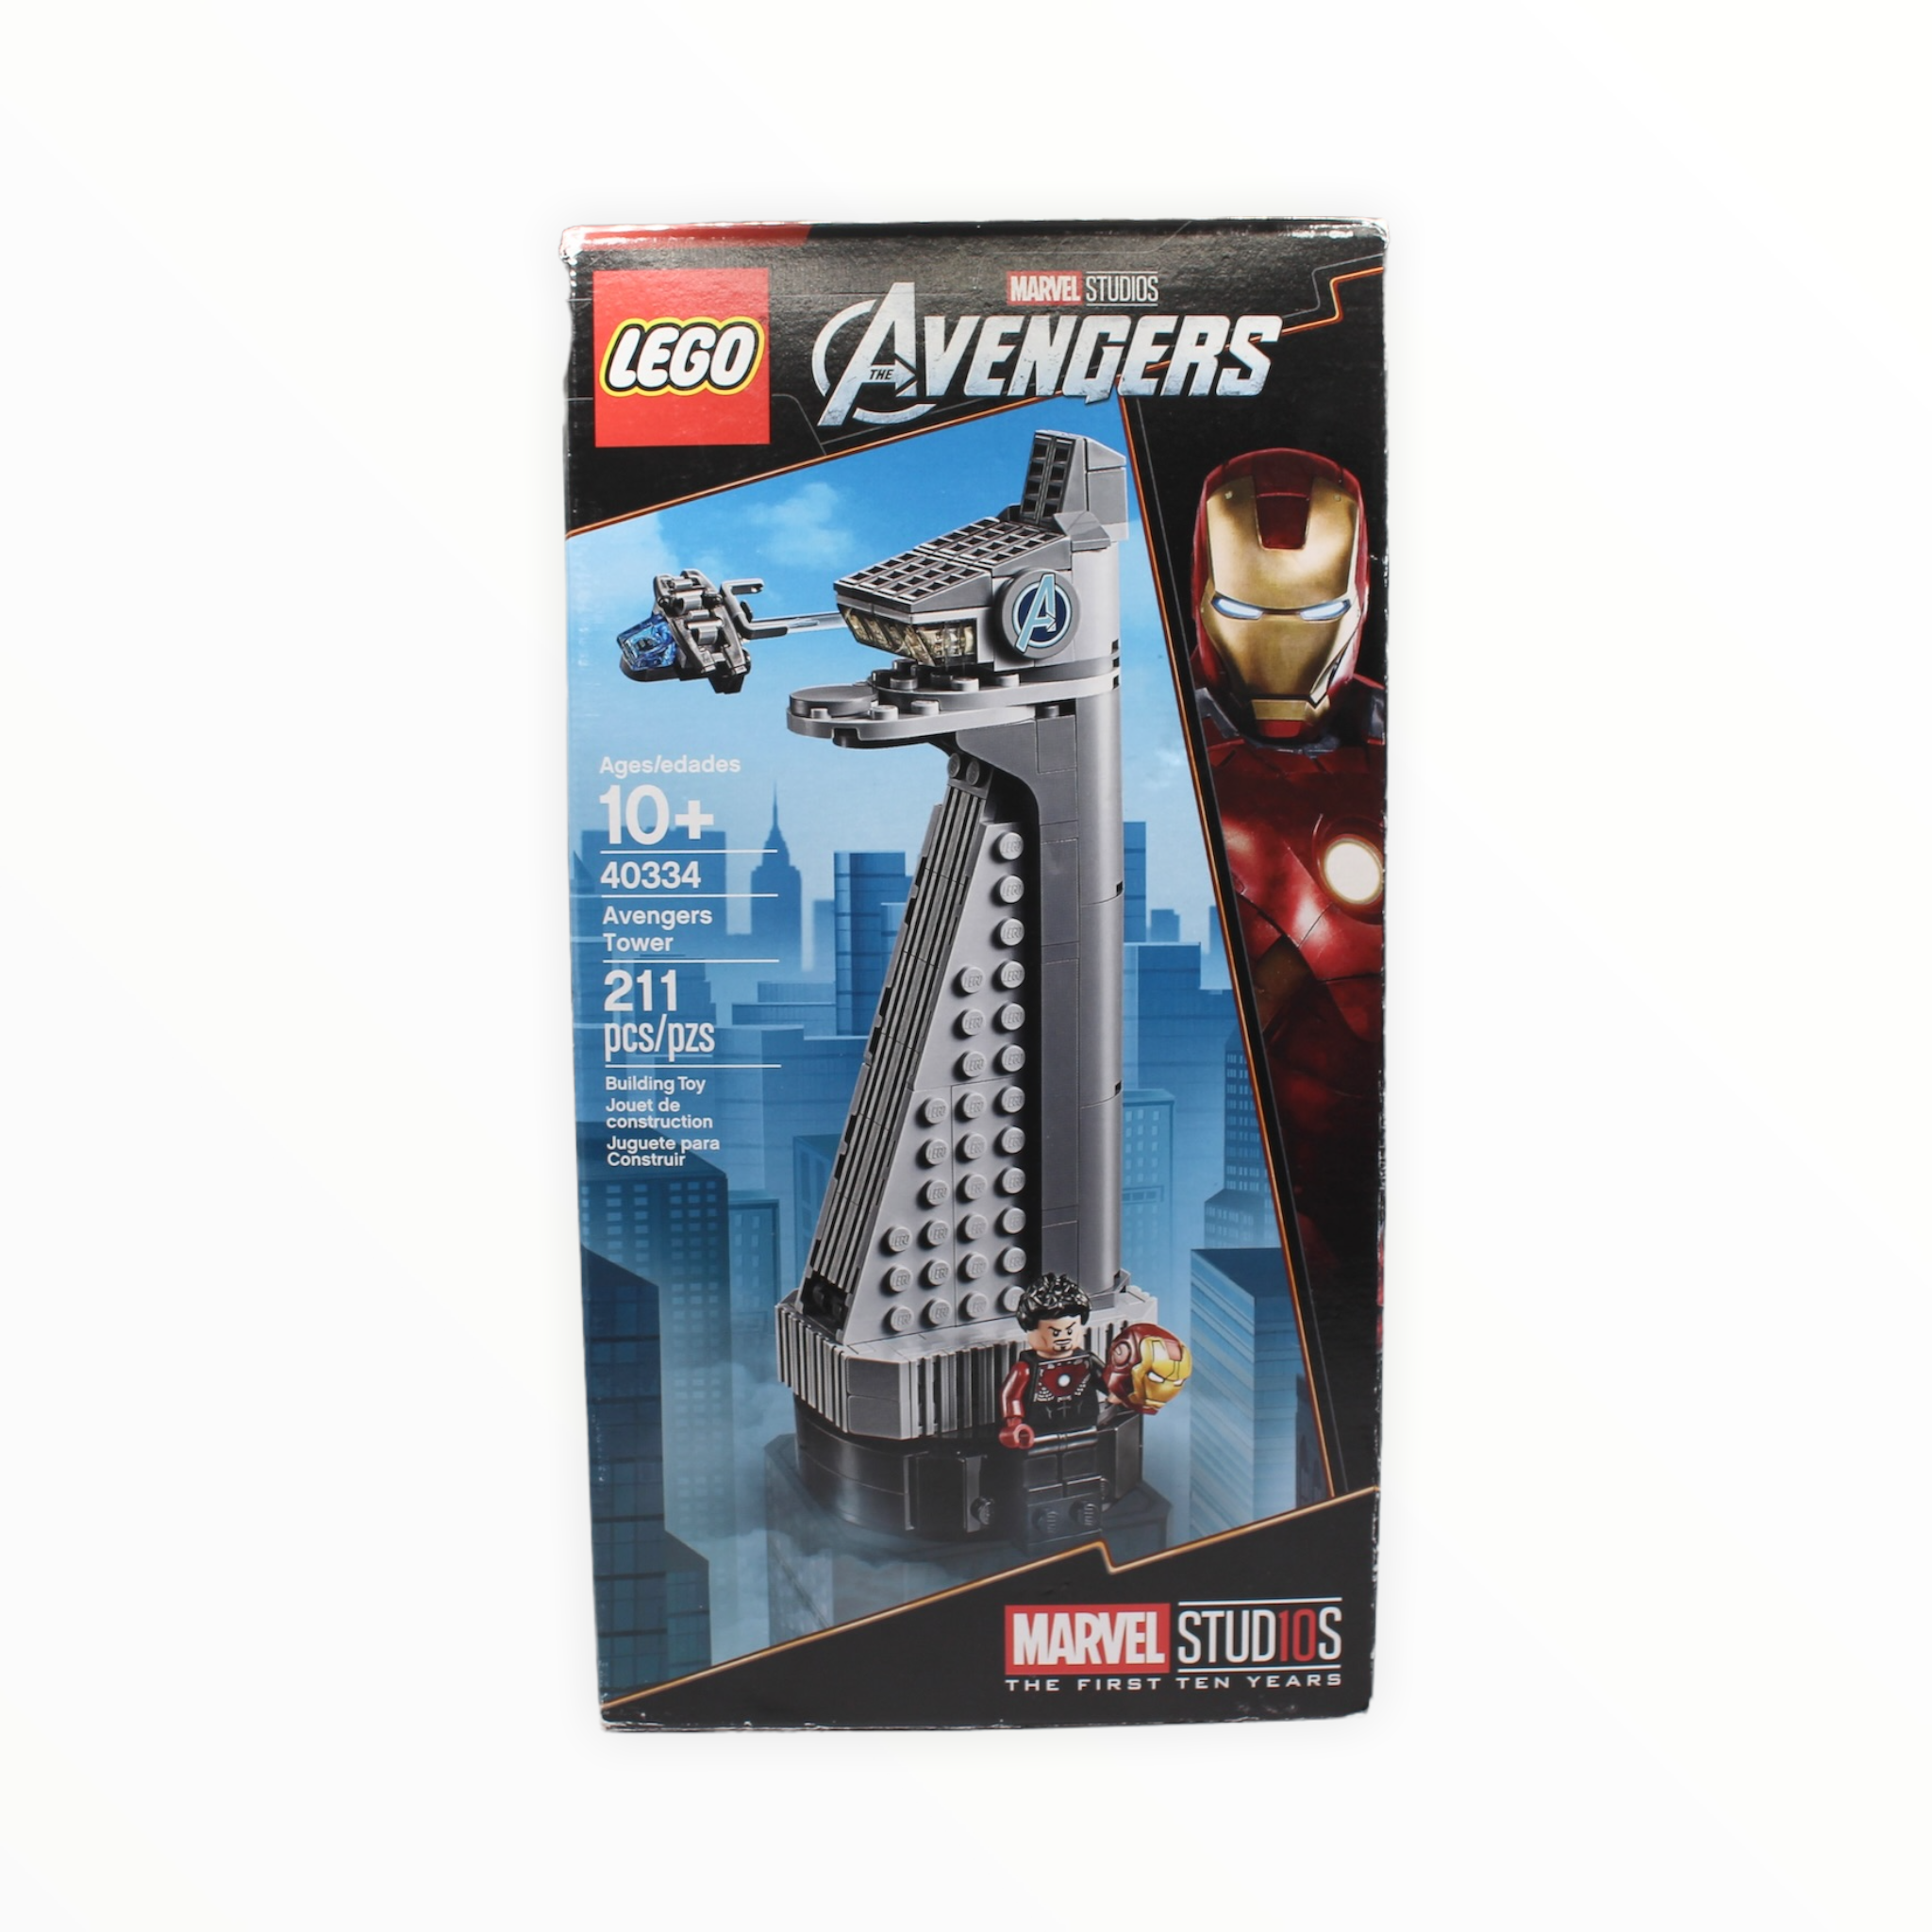 Certified Used Set 40334 Marvel Avengers Tower